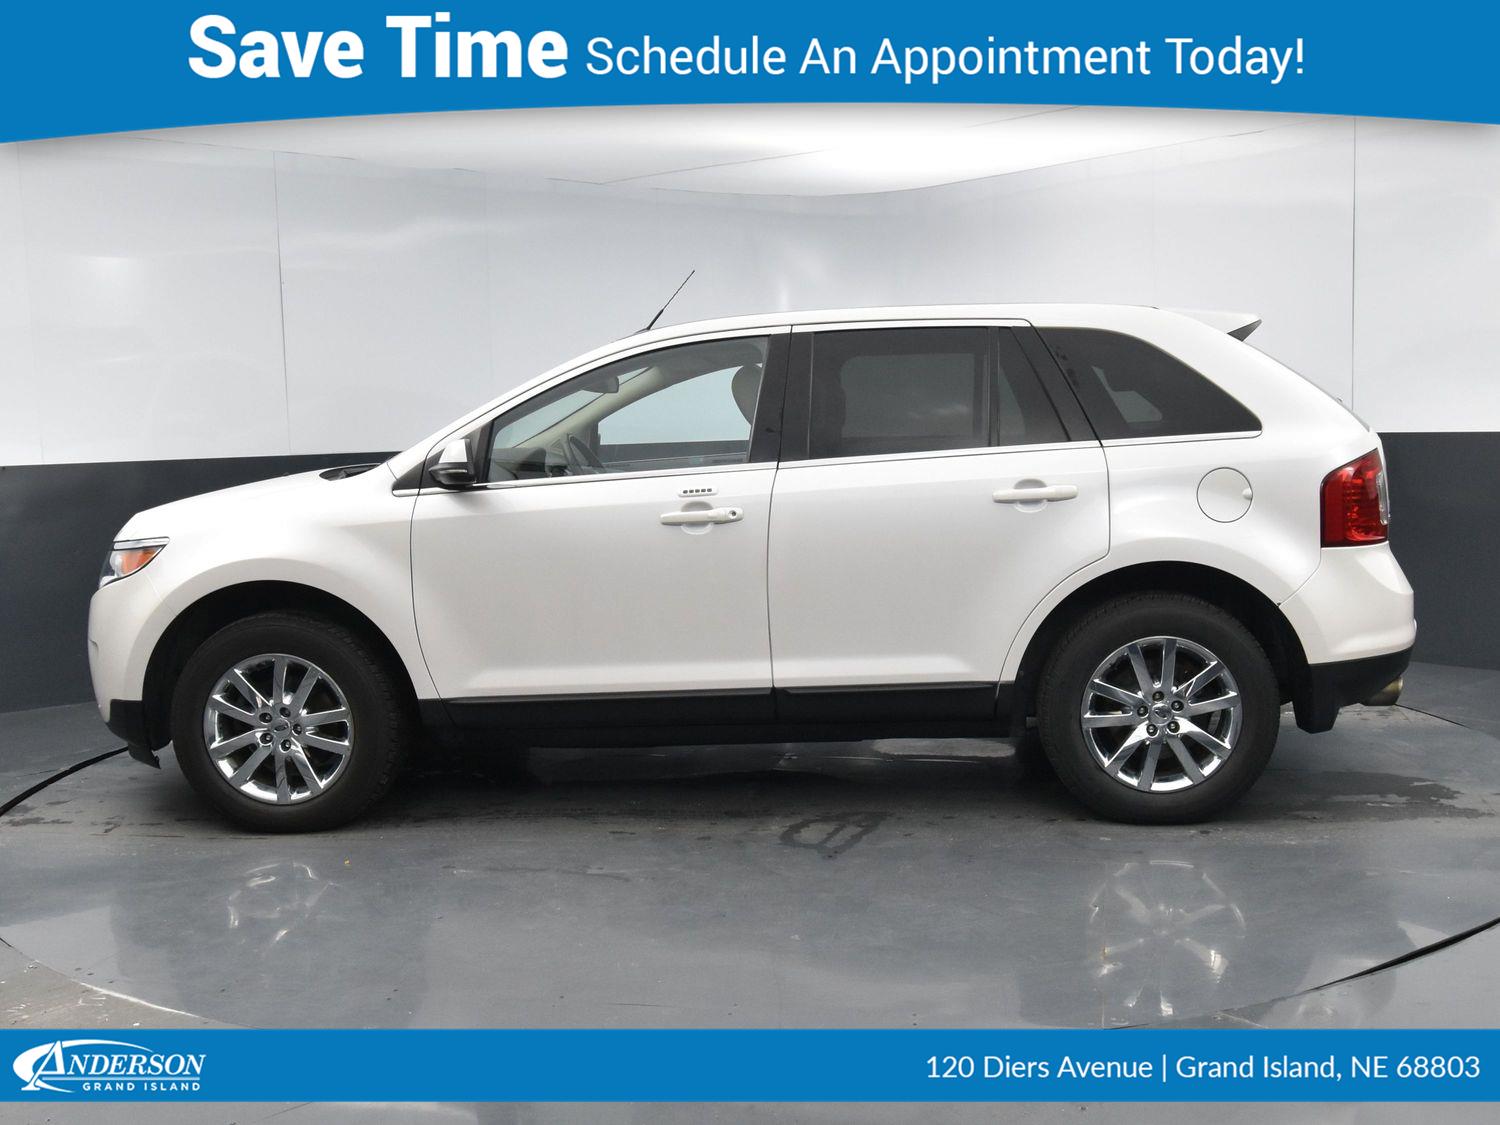 Used 2013 Ford Edge Limited Stock: 2001432A